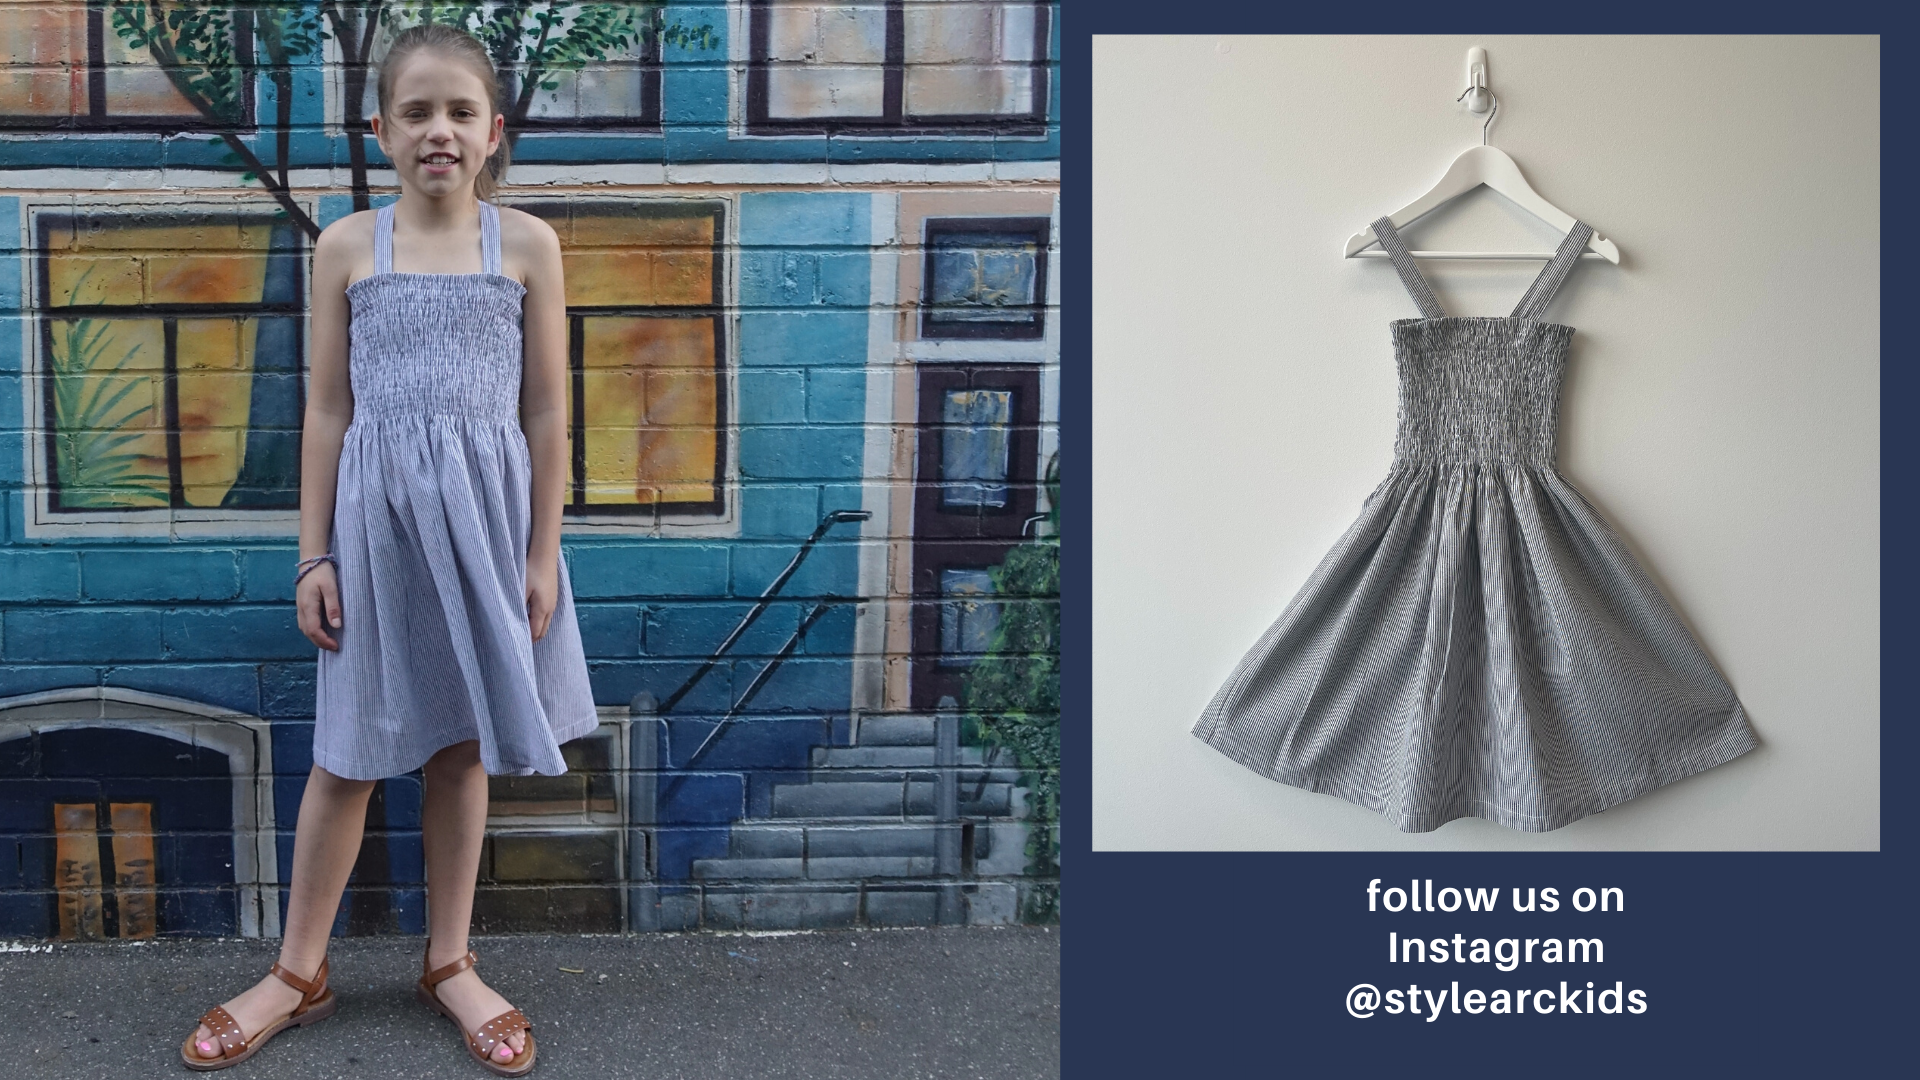 Style Arc's latest release the Pippa Teens Dress and Top pattern 